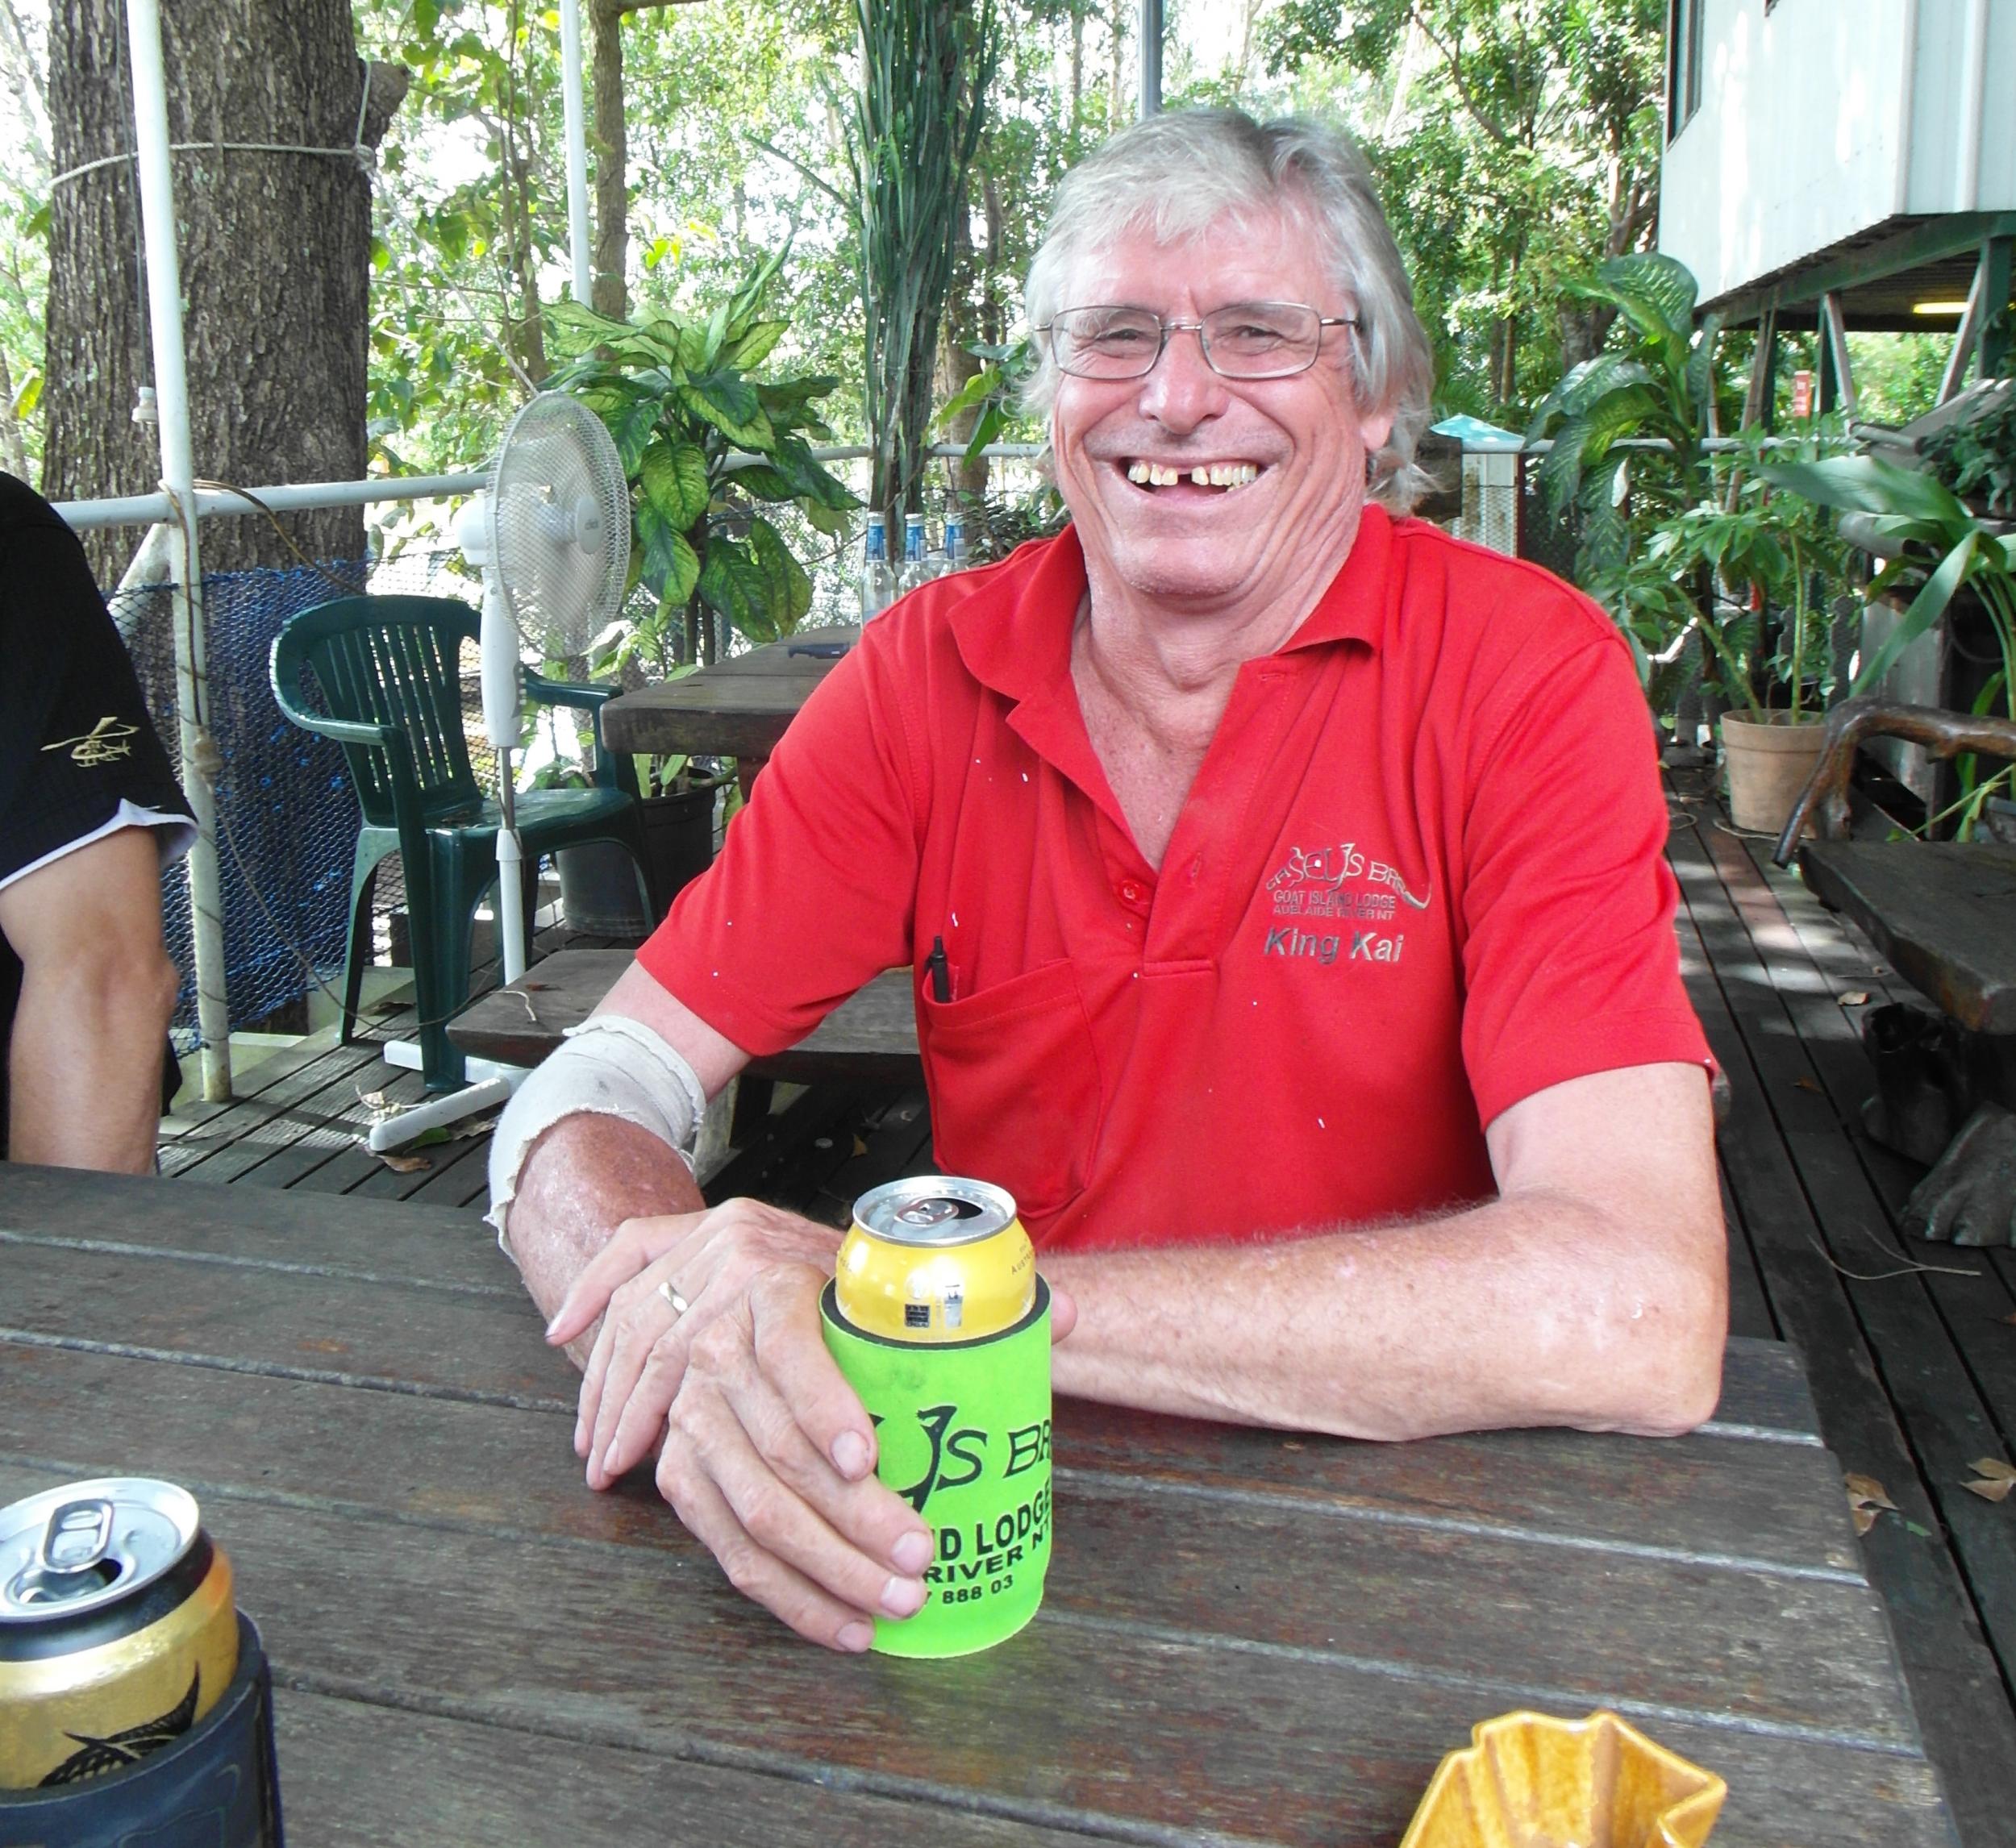 The pub crawl lets you drink with legends like Kai on Goat Island